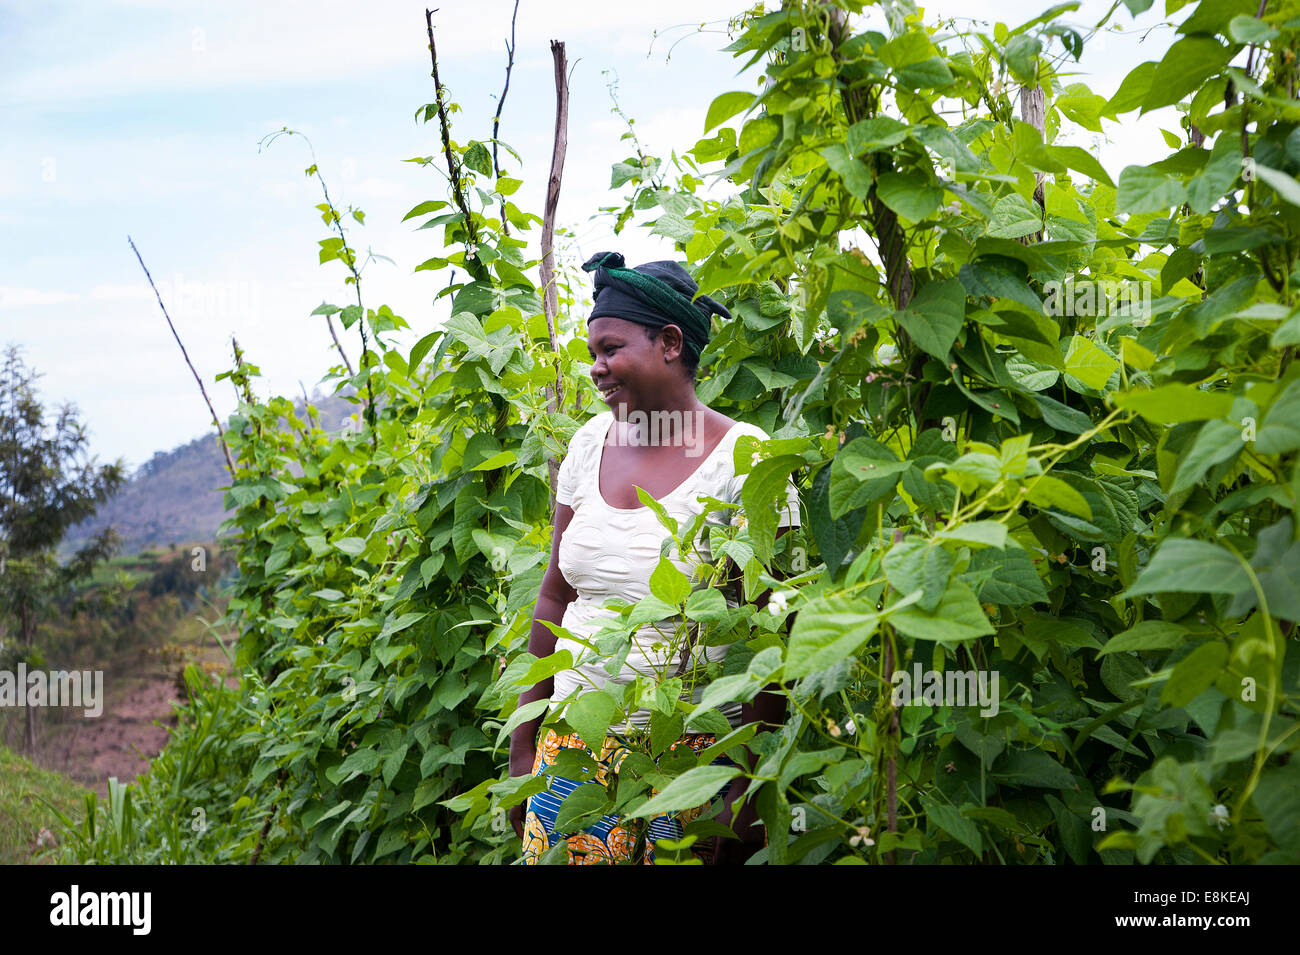 RWANDA, NYAMAGABE: Marie Mukadera lives in one of the poorest districts of Rwanda. She has a small house and a piece of land. Stock Photo